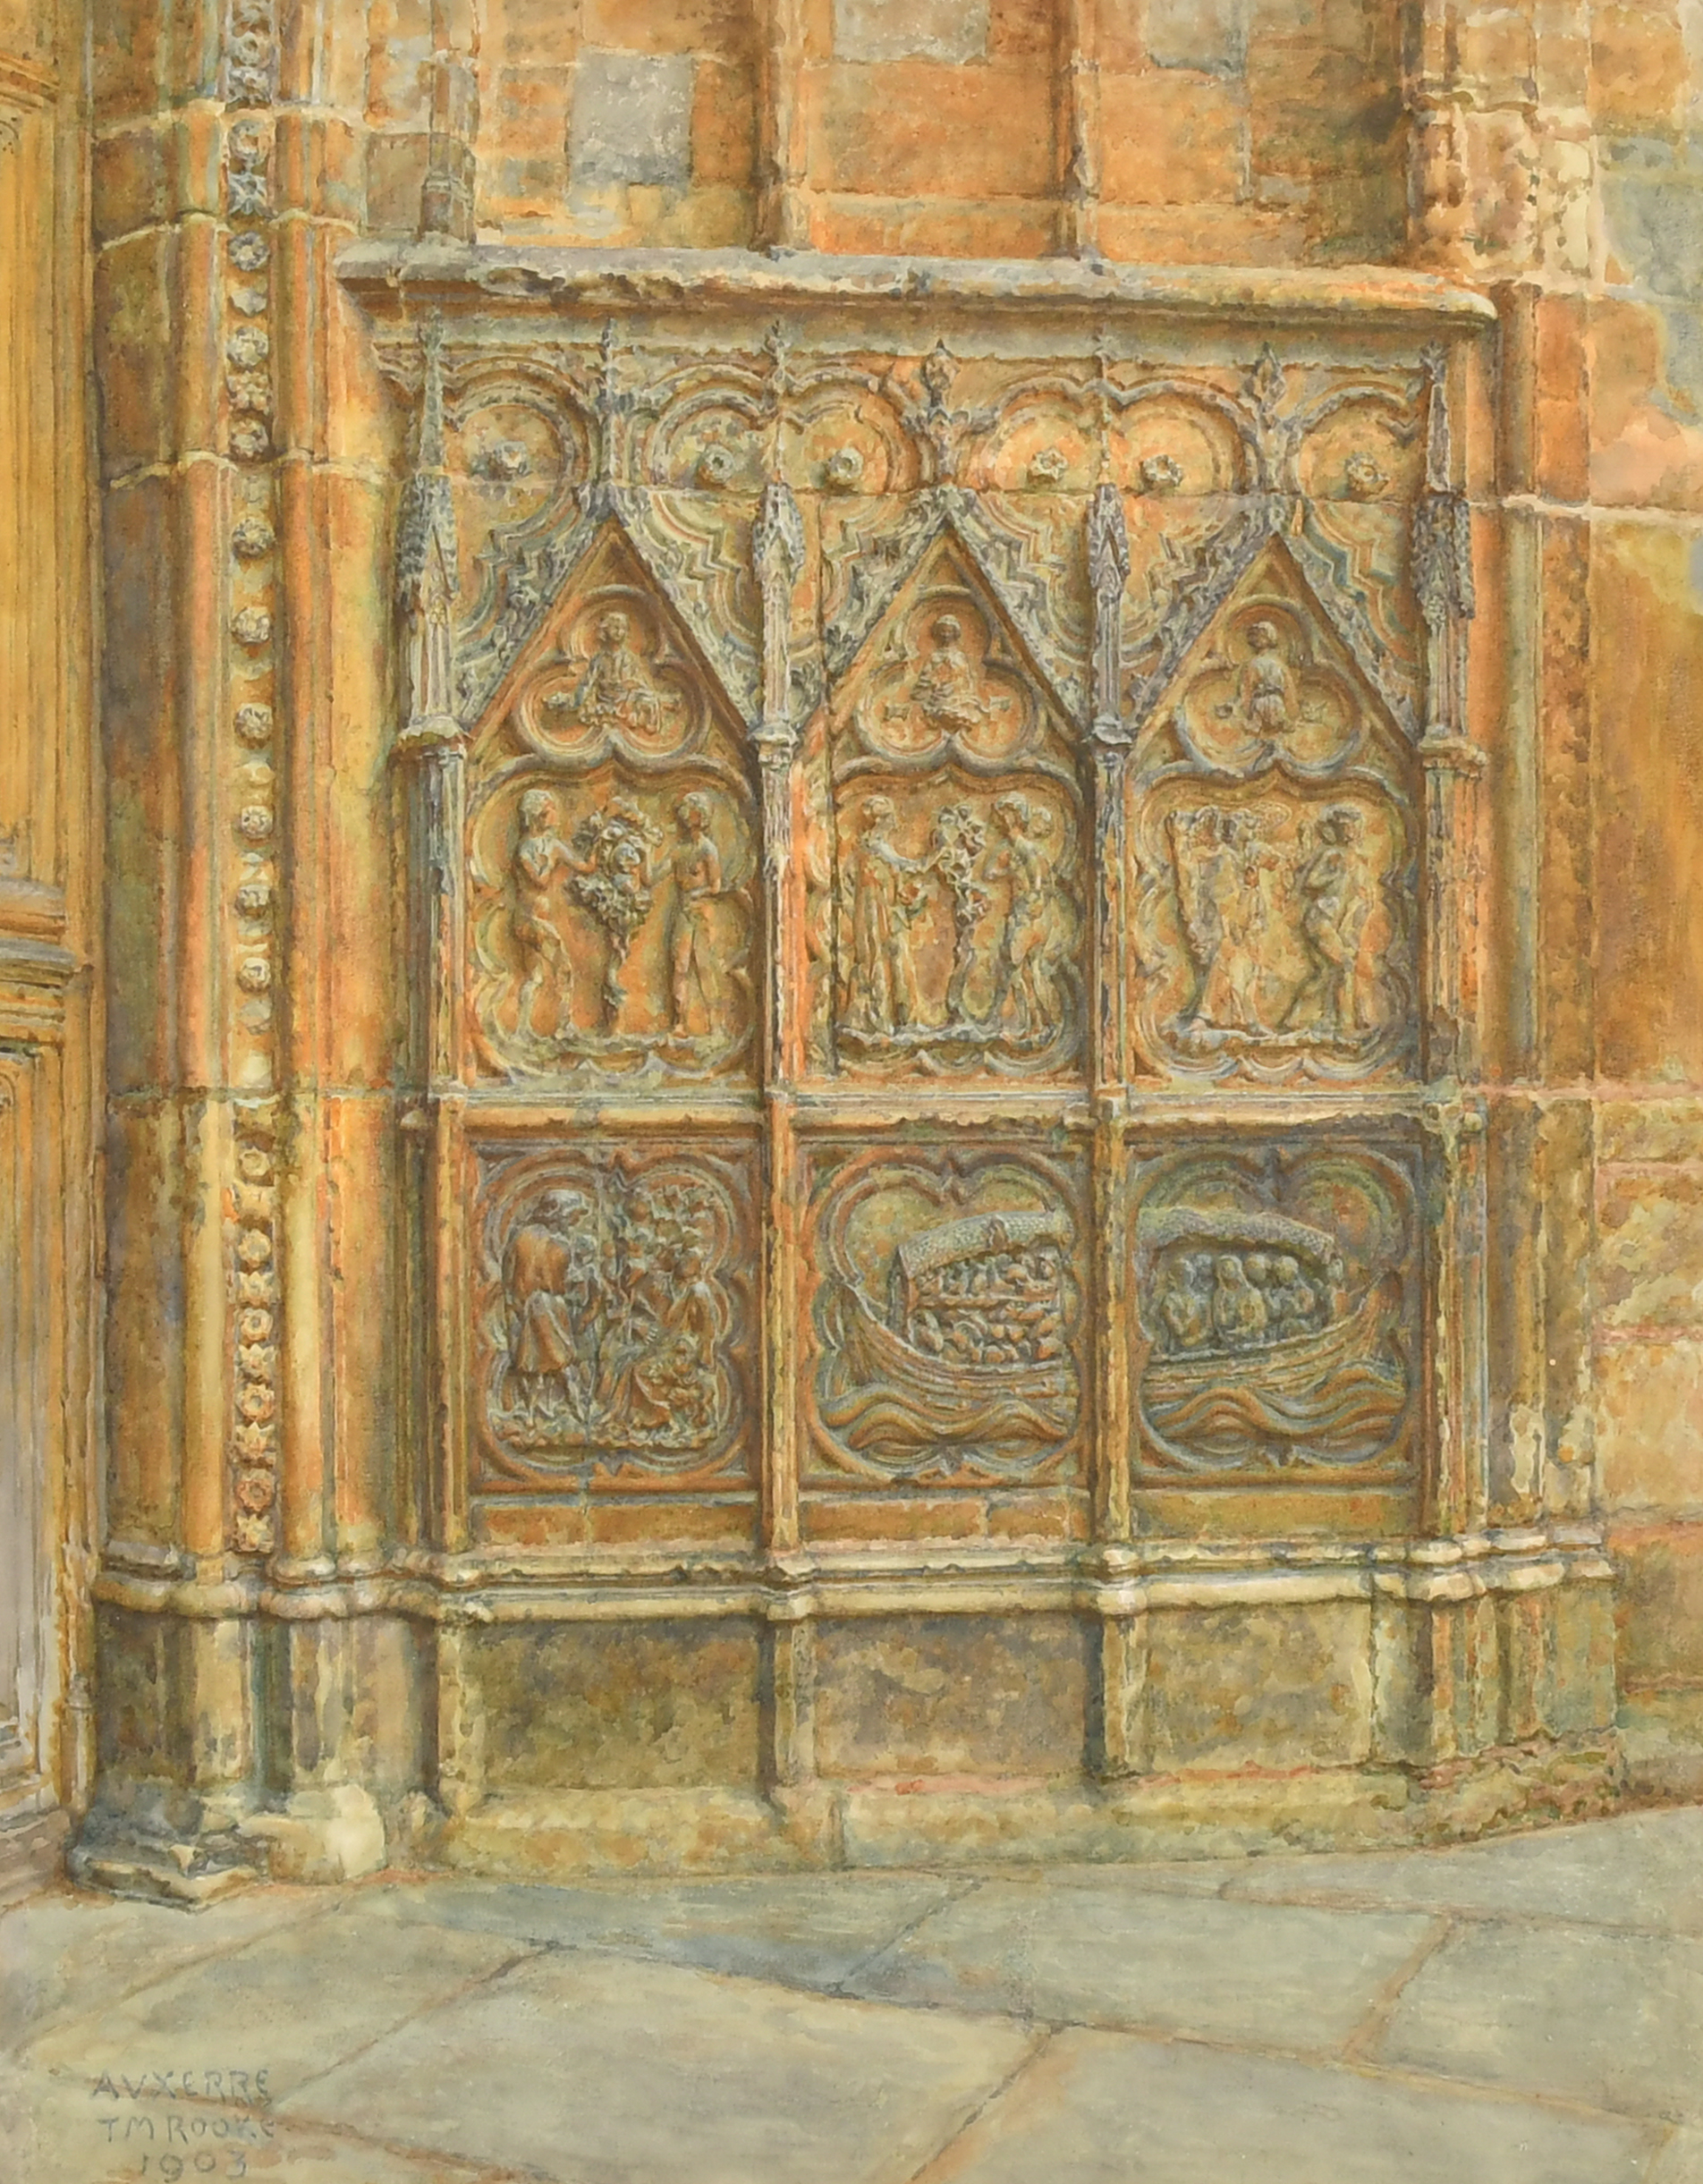 Thomas Matthew Rooke (1842-1942) British. "Carvings by The Cathedral Door Auxerre, France",